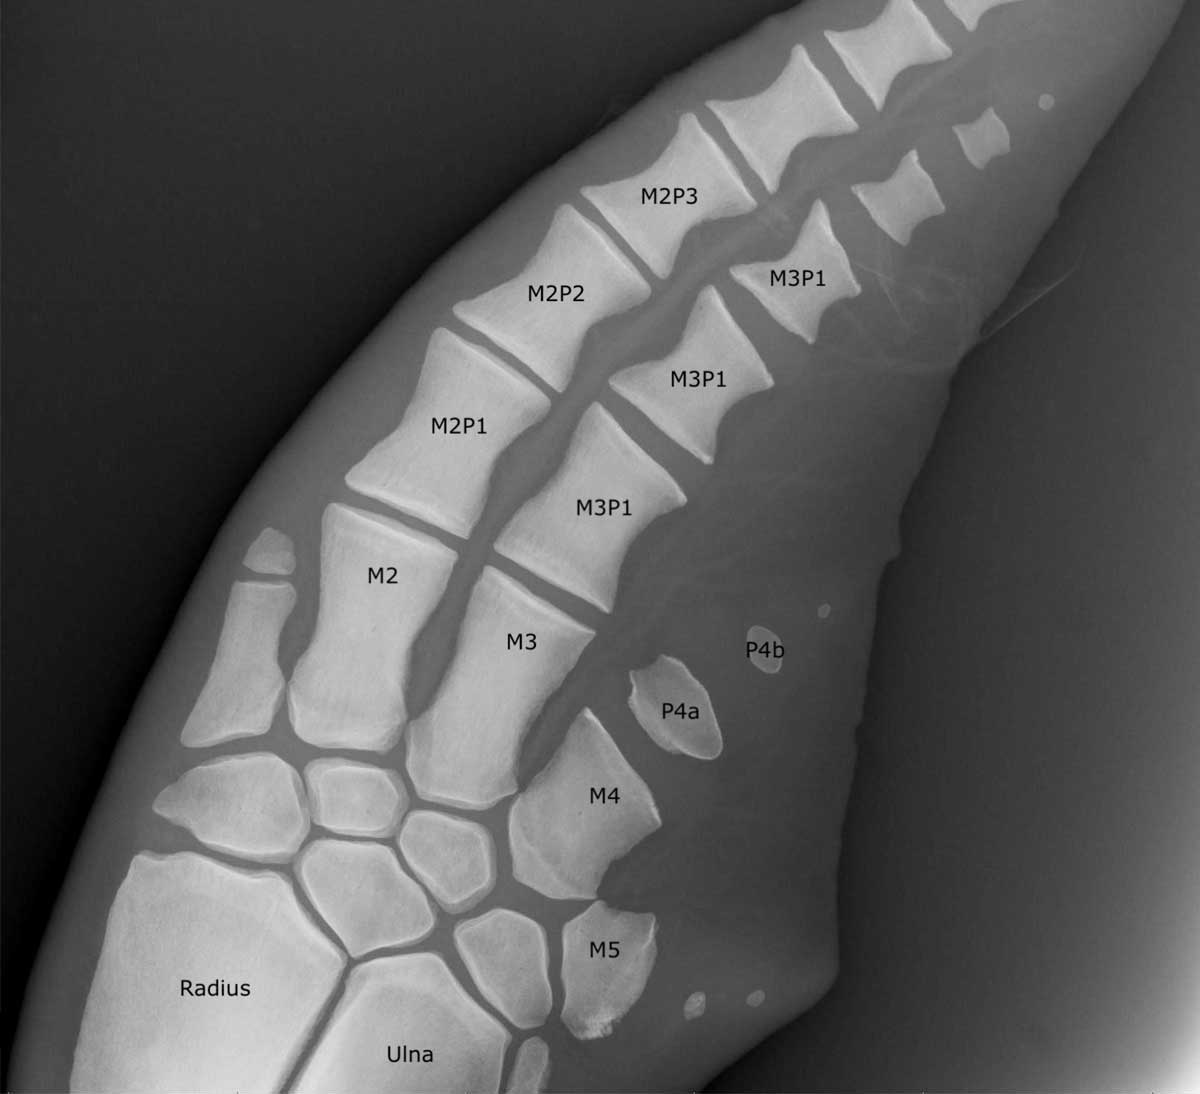 NMMF labelled dolphin pec radiograph